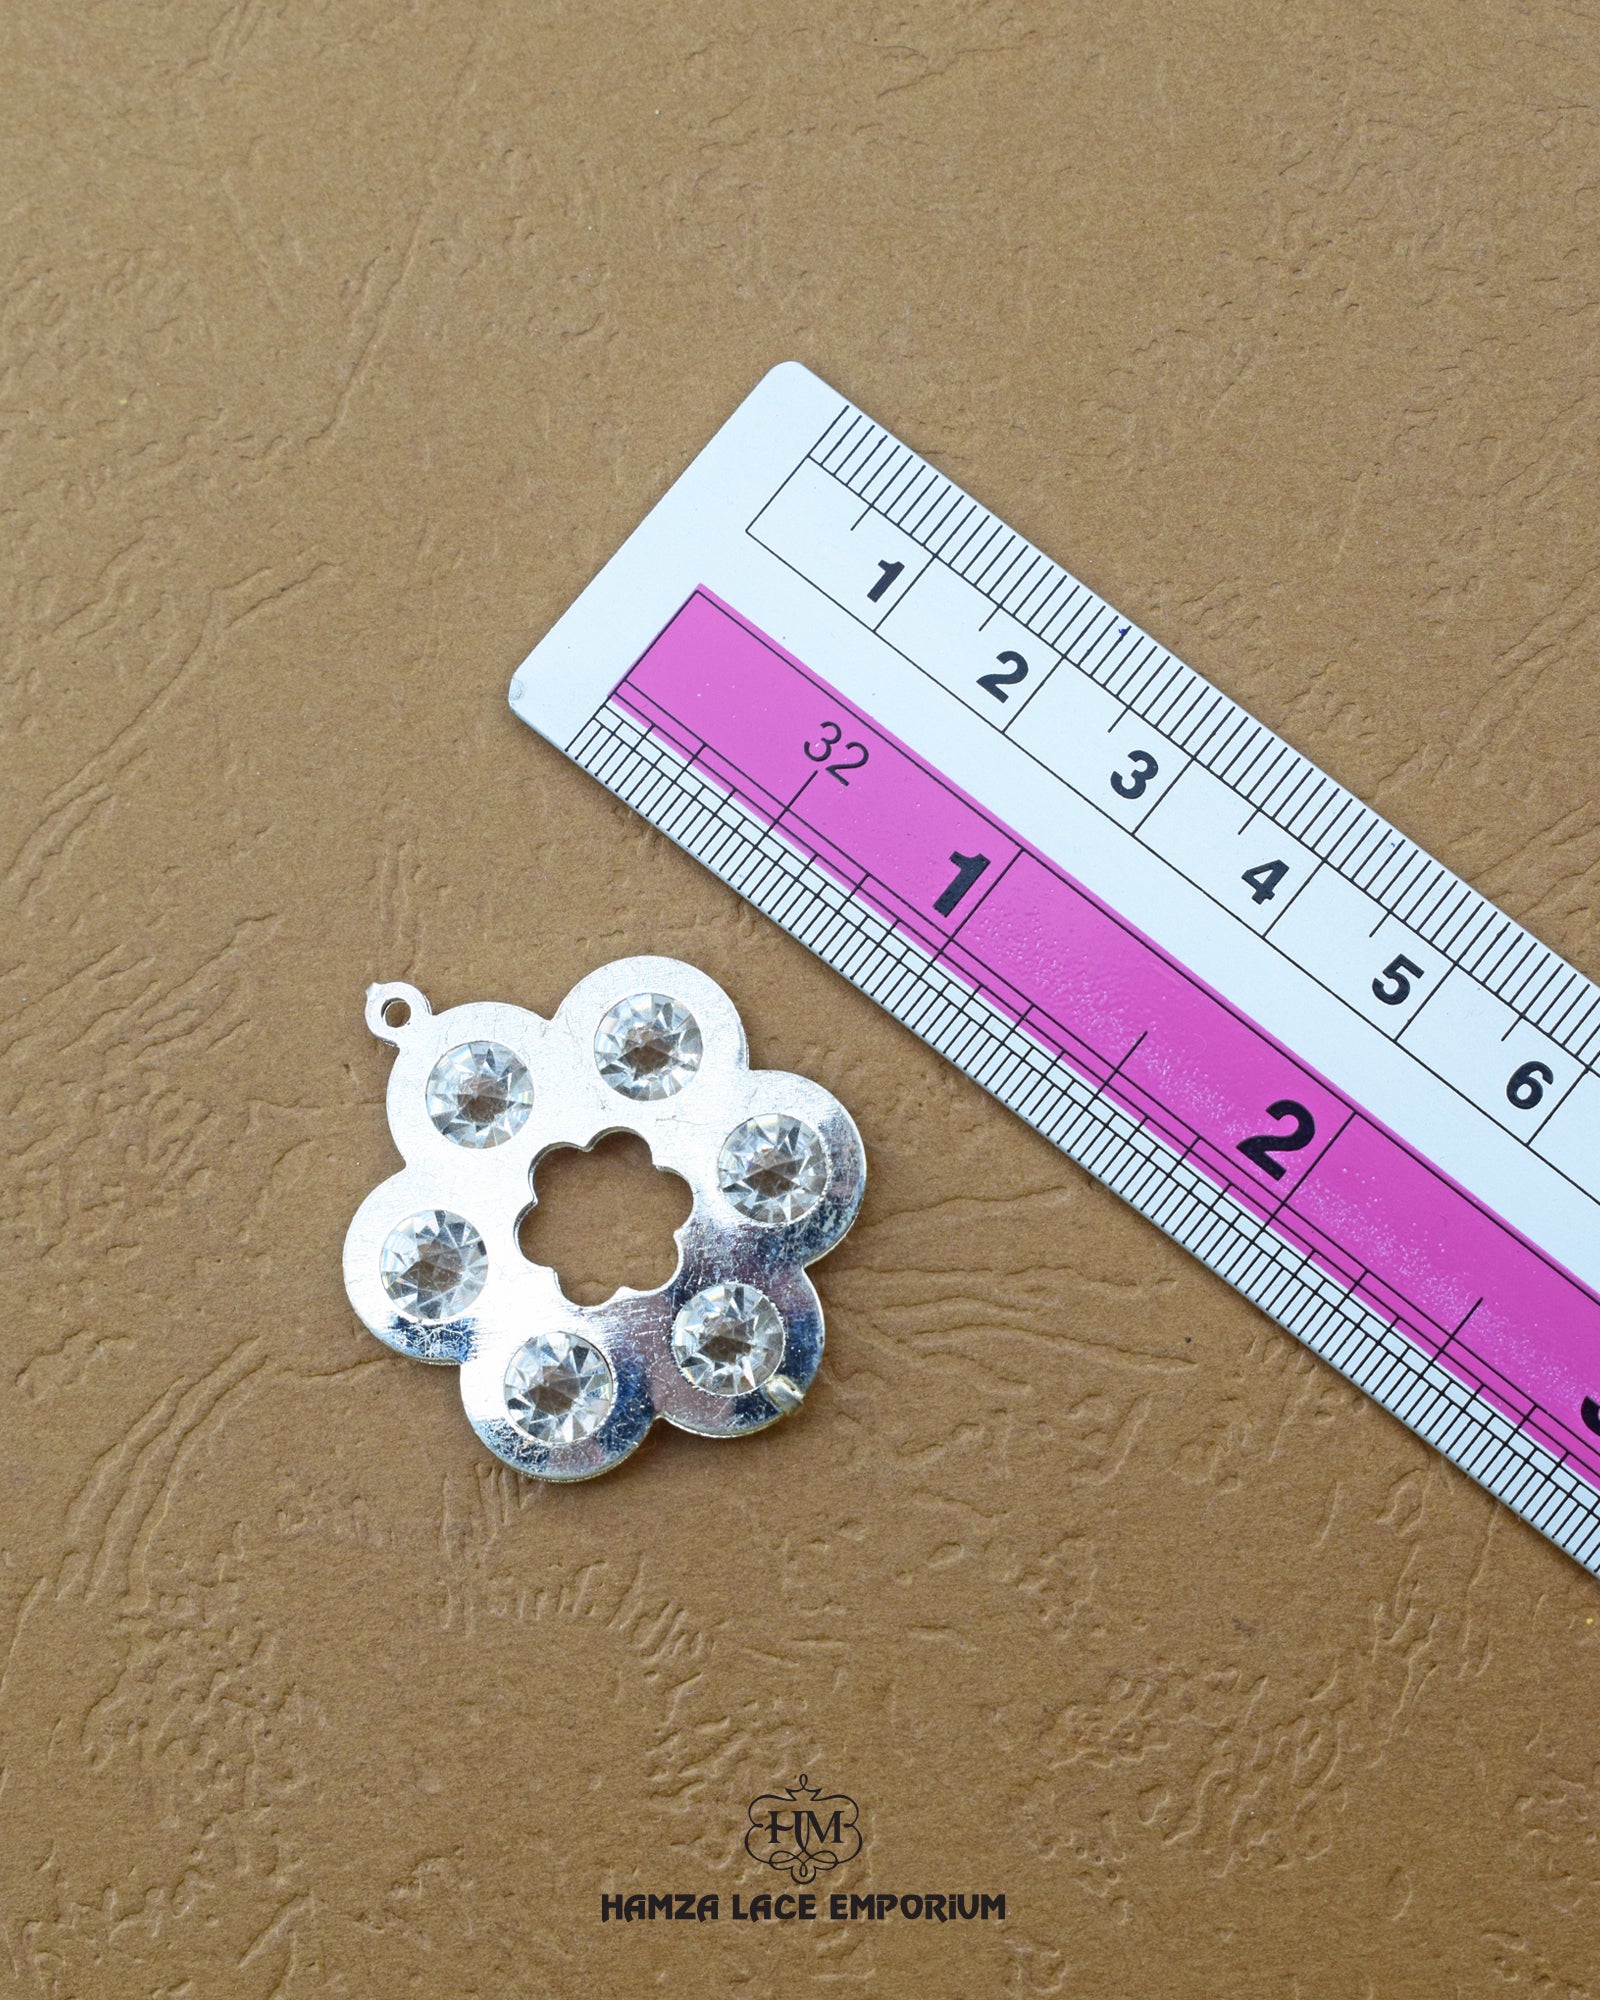 The size of the 'Flower Design Metal Accessory MA97' is showcased alongside a helpful ruler to visualize and assess the product size accurately.